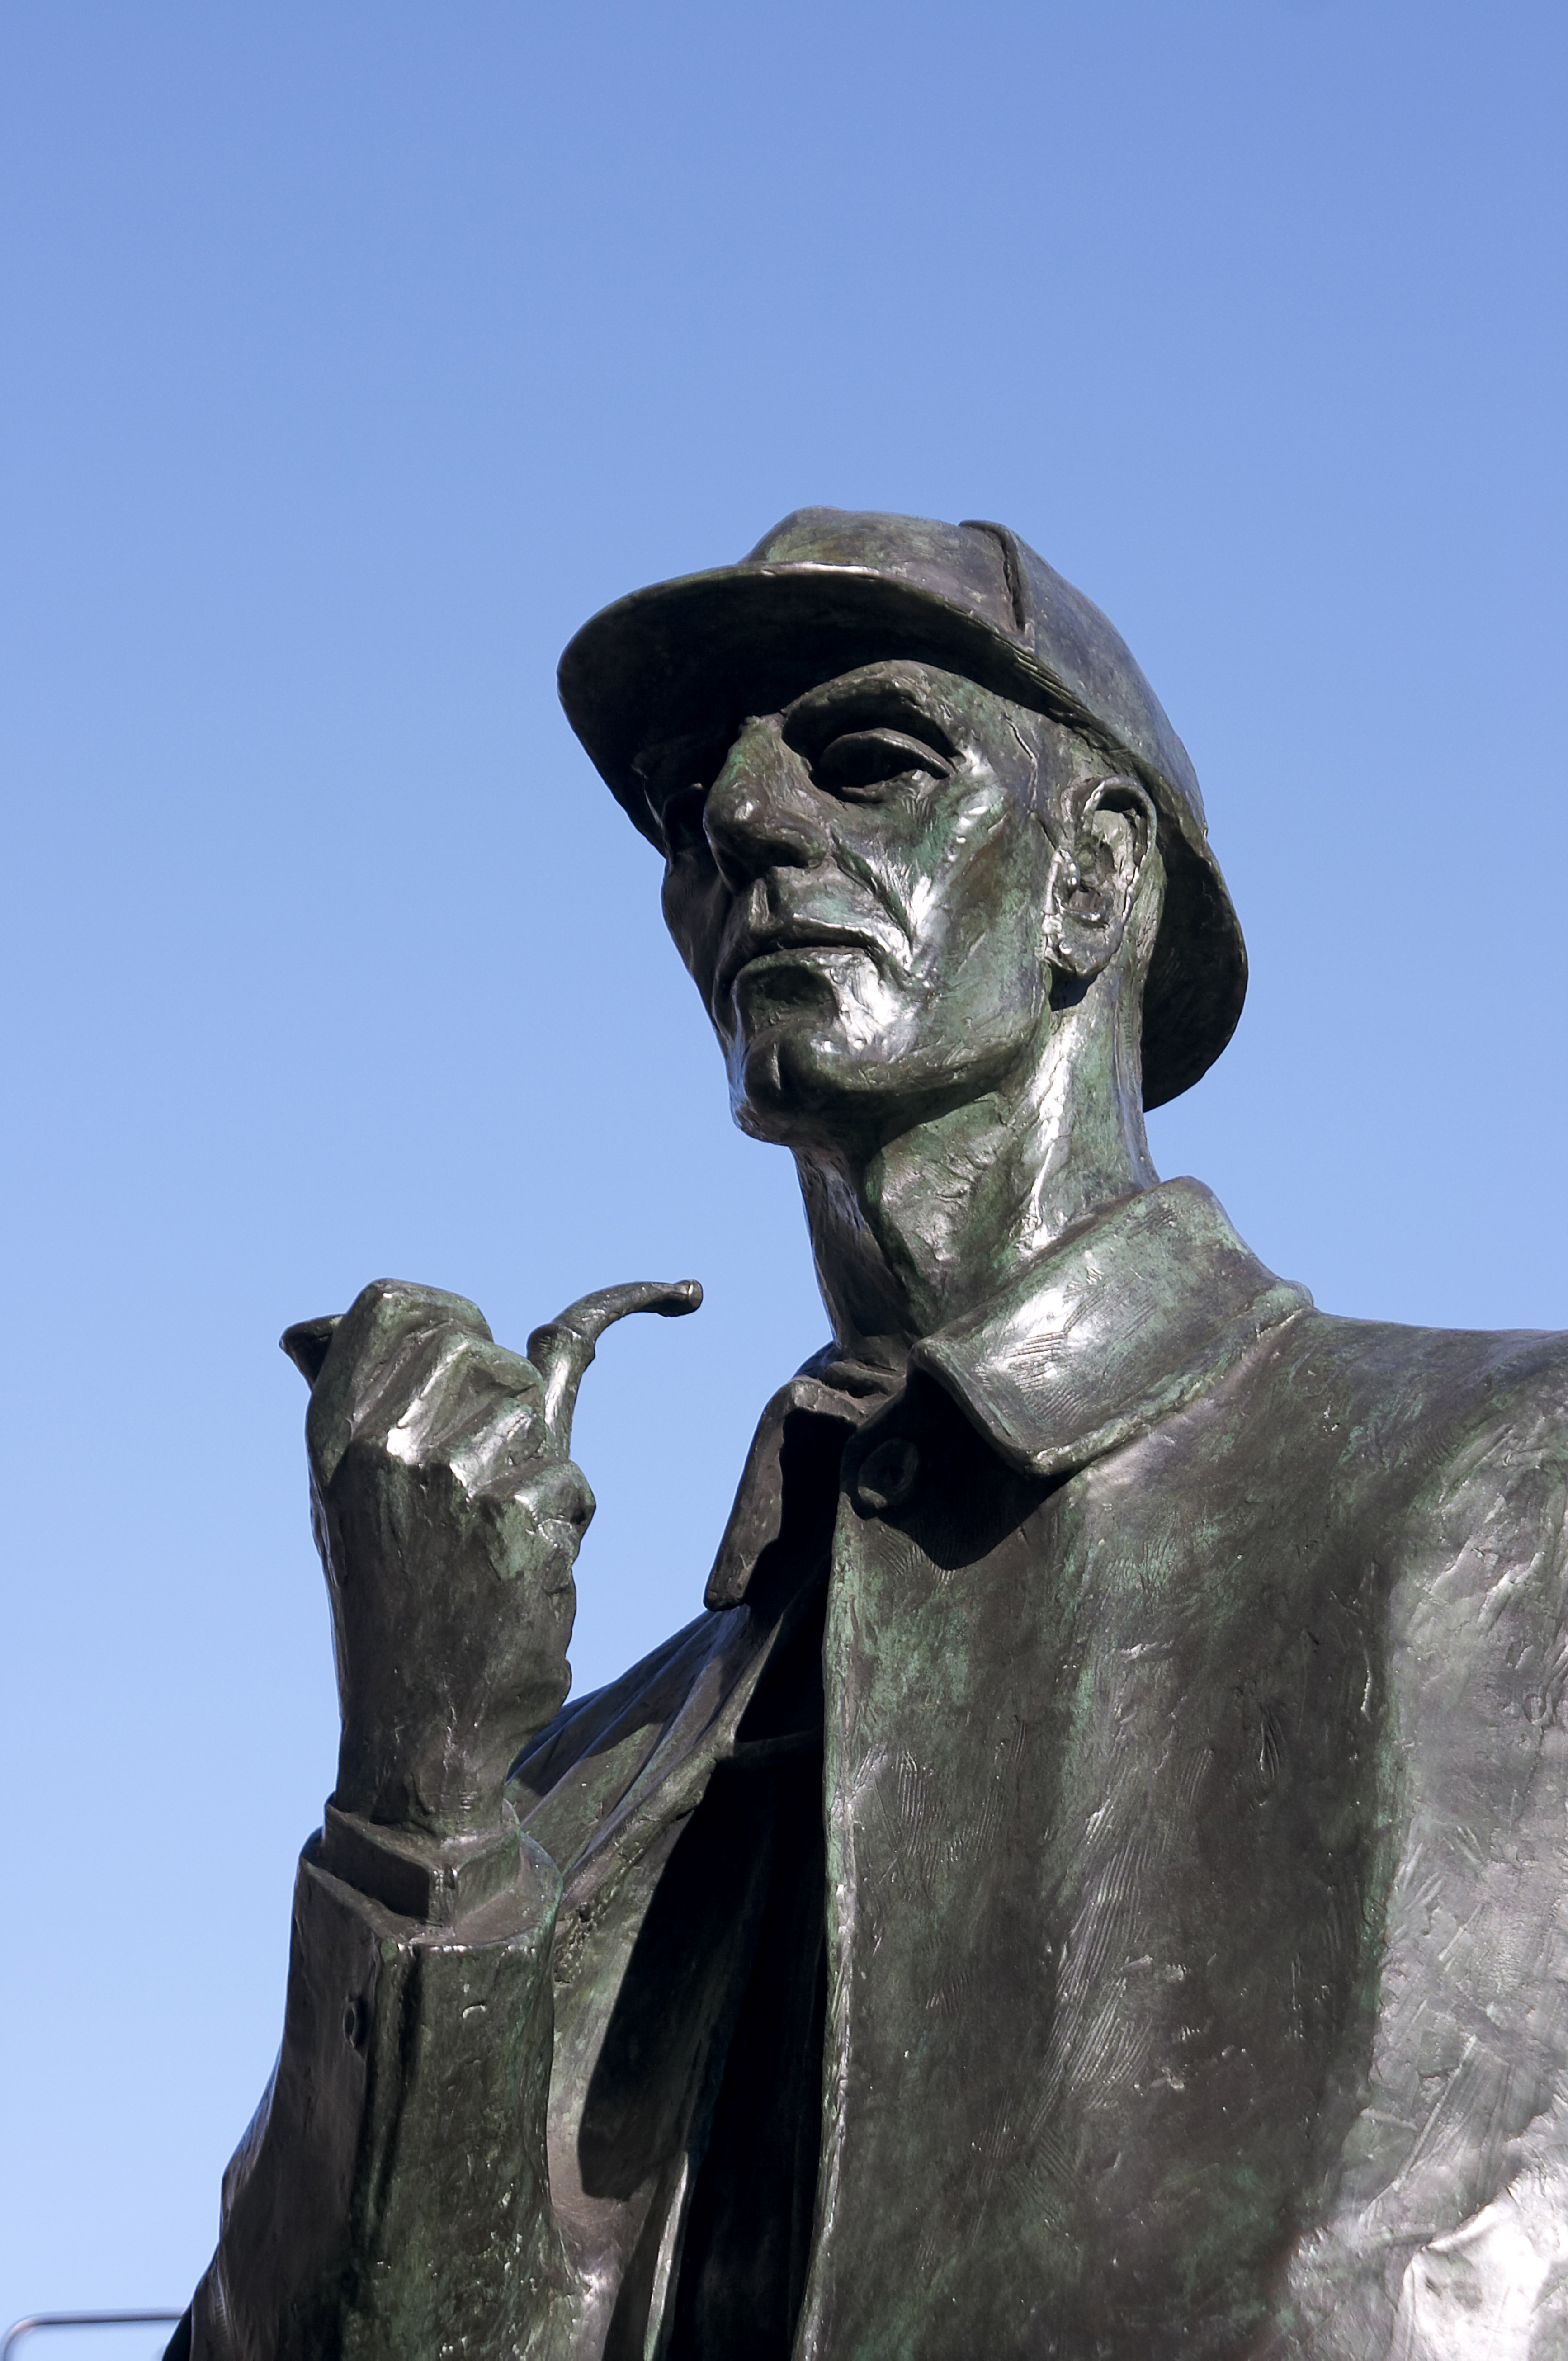 The Sherlock Holmes statue on Baker Street in London. (Andrew Holt—Getty Images)